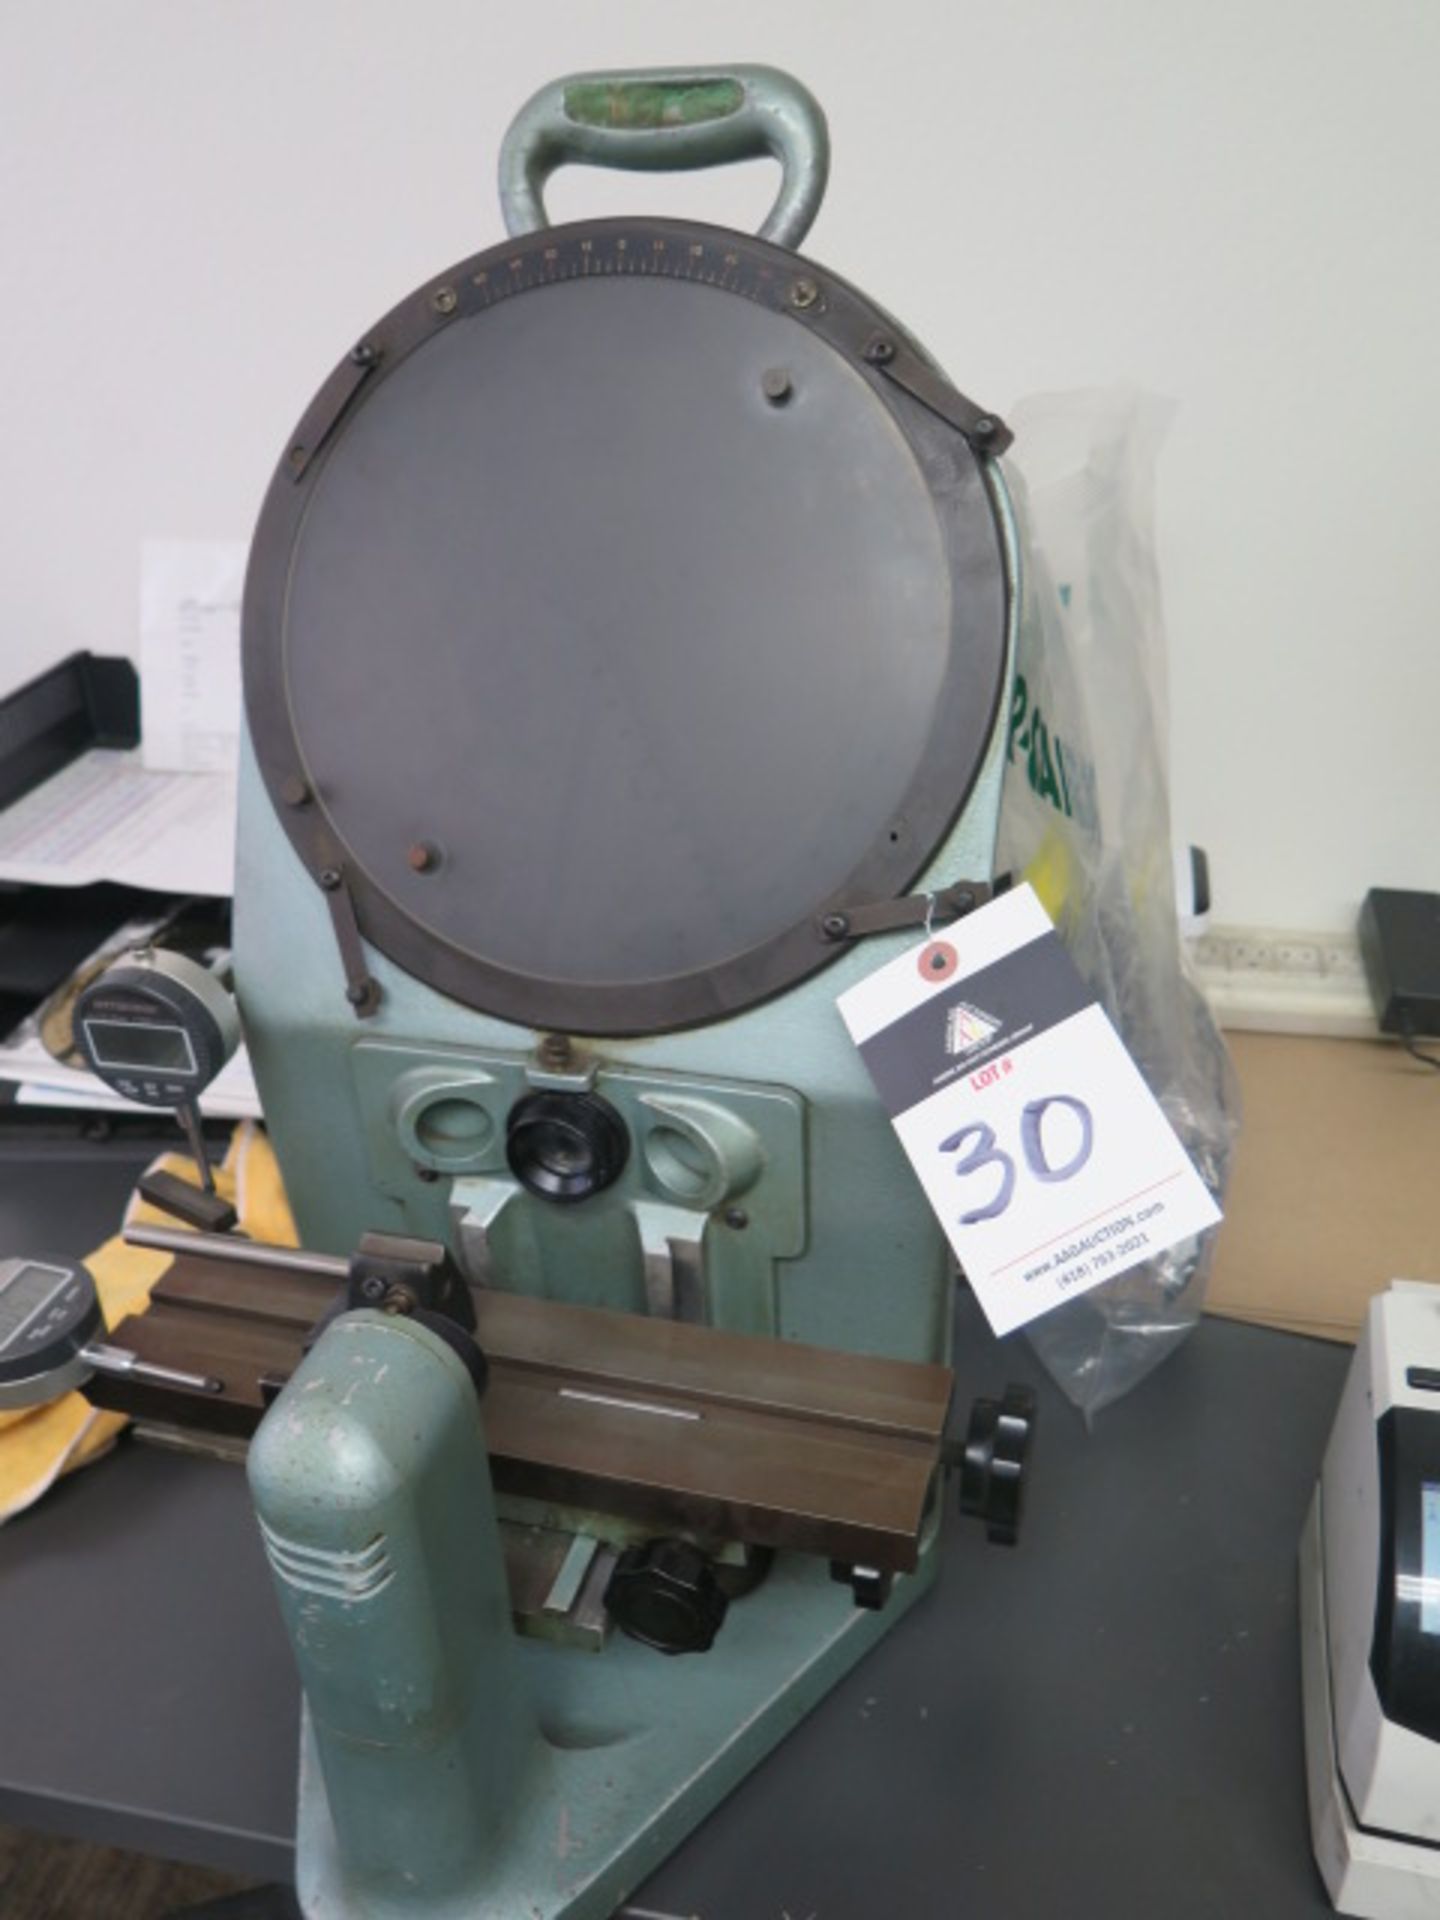 Rankin Brothers 10" Bench Model Optical Comparator w/ Digital Indicator Readouts